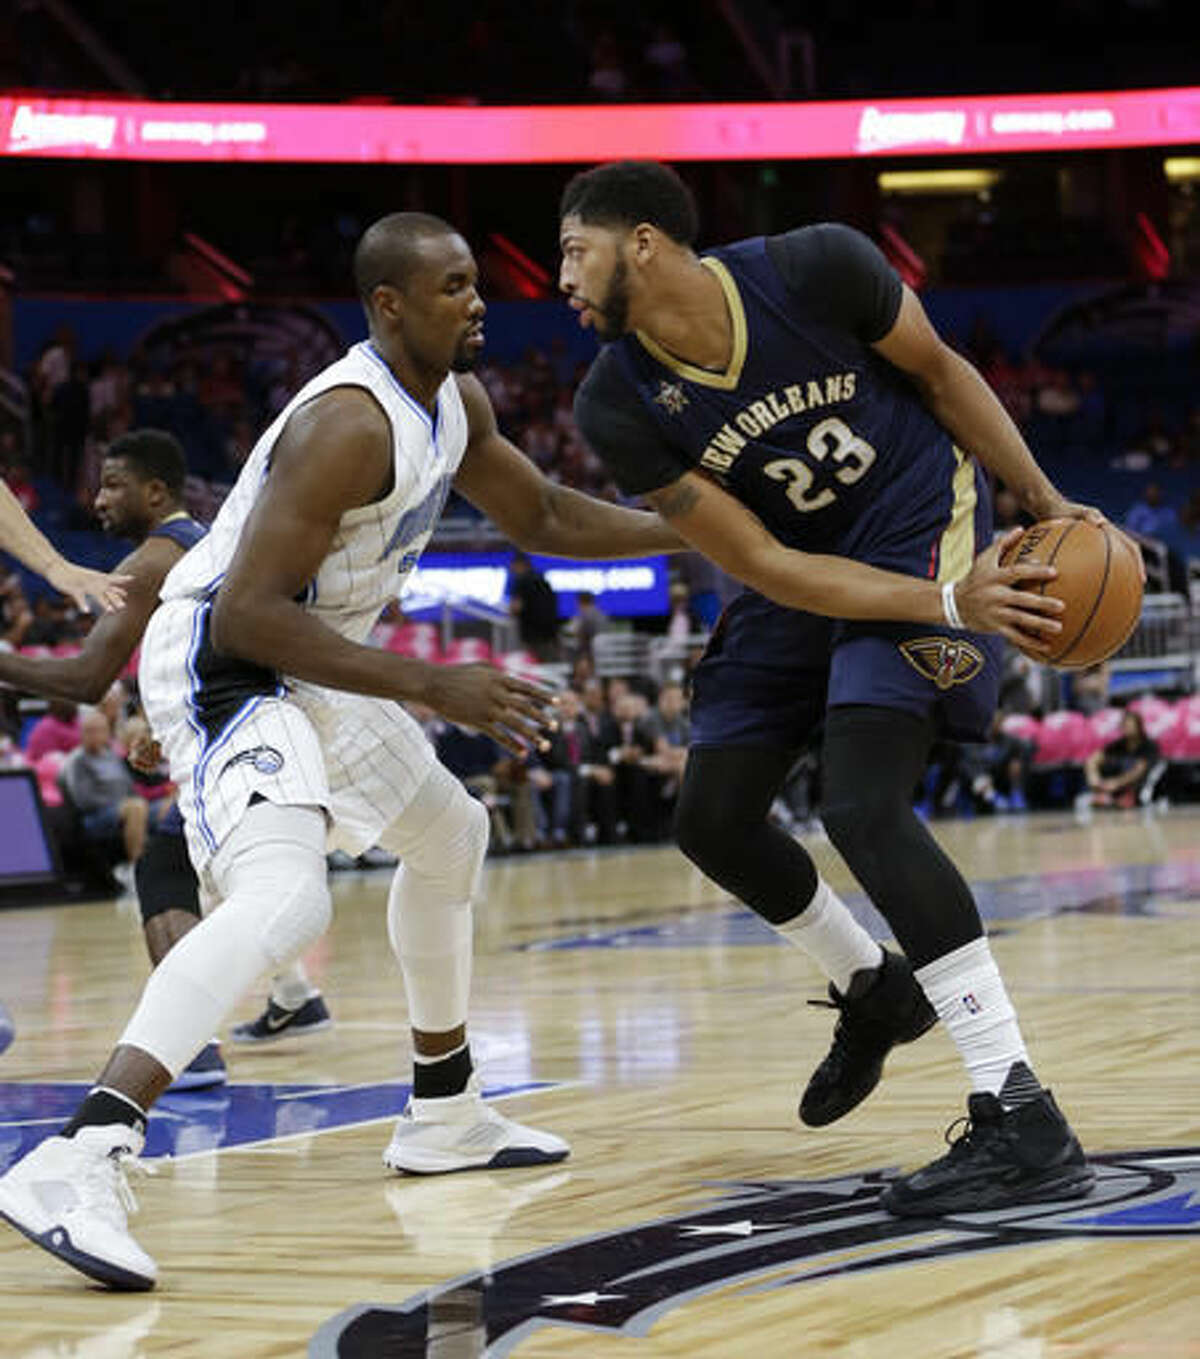 New Orleans Pelicans' Anthony Davis (23) makes a move to get to the basket around Orlando Magic's Serge Ibaka during the first half of an NBA basketball game, Thursday, Oct. 20, 2016, in Orlando, Fla. (AP Photo/John Raoux)